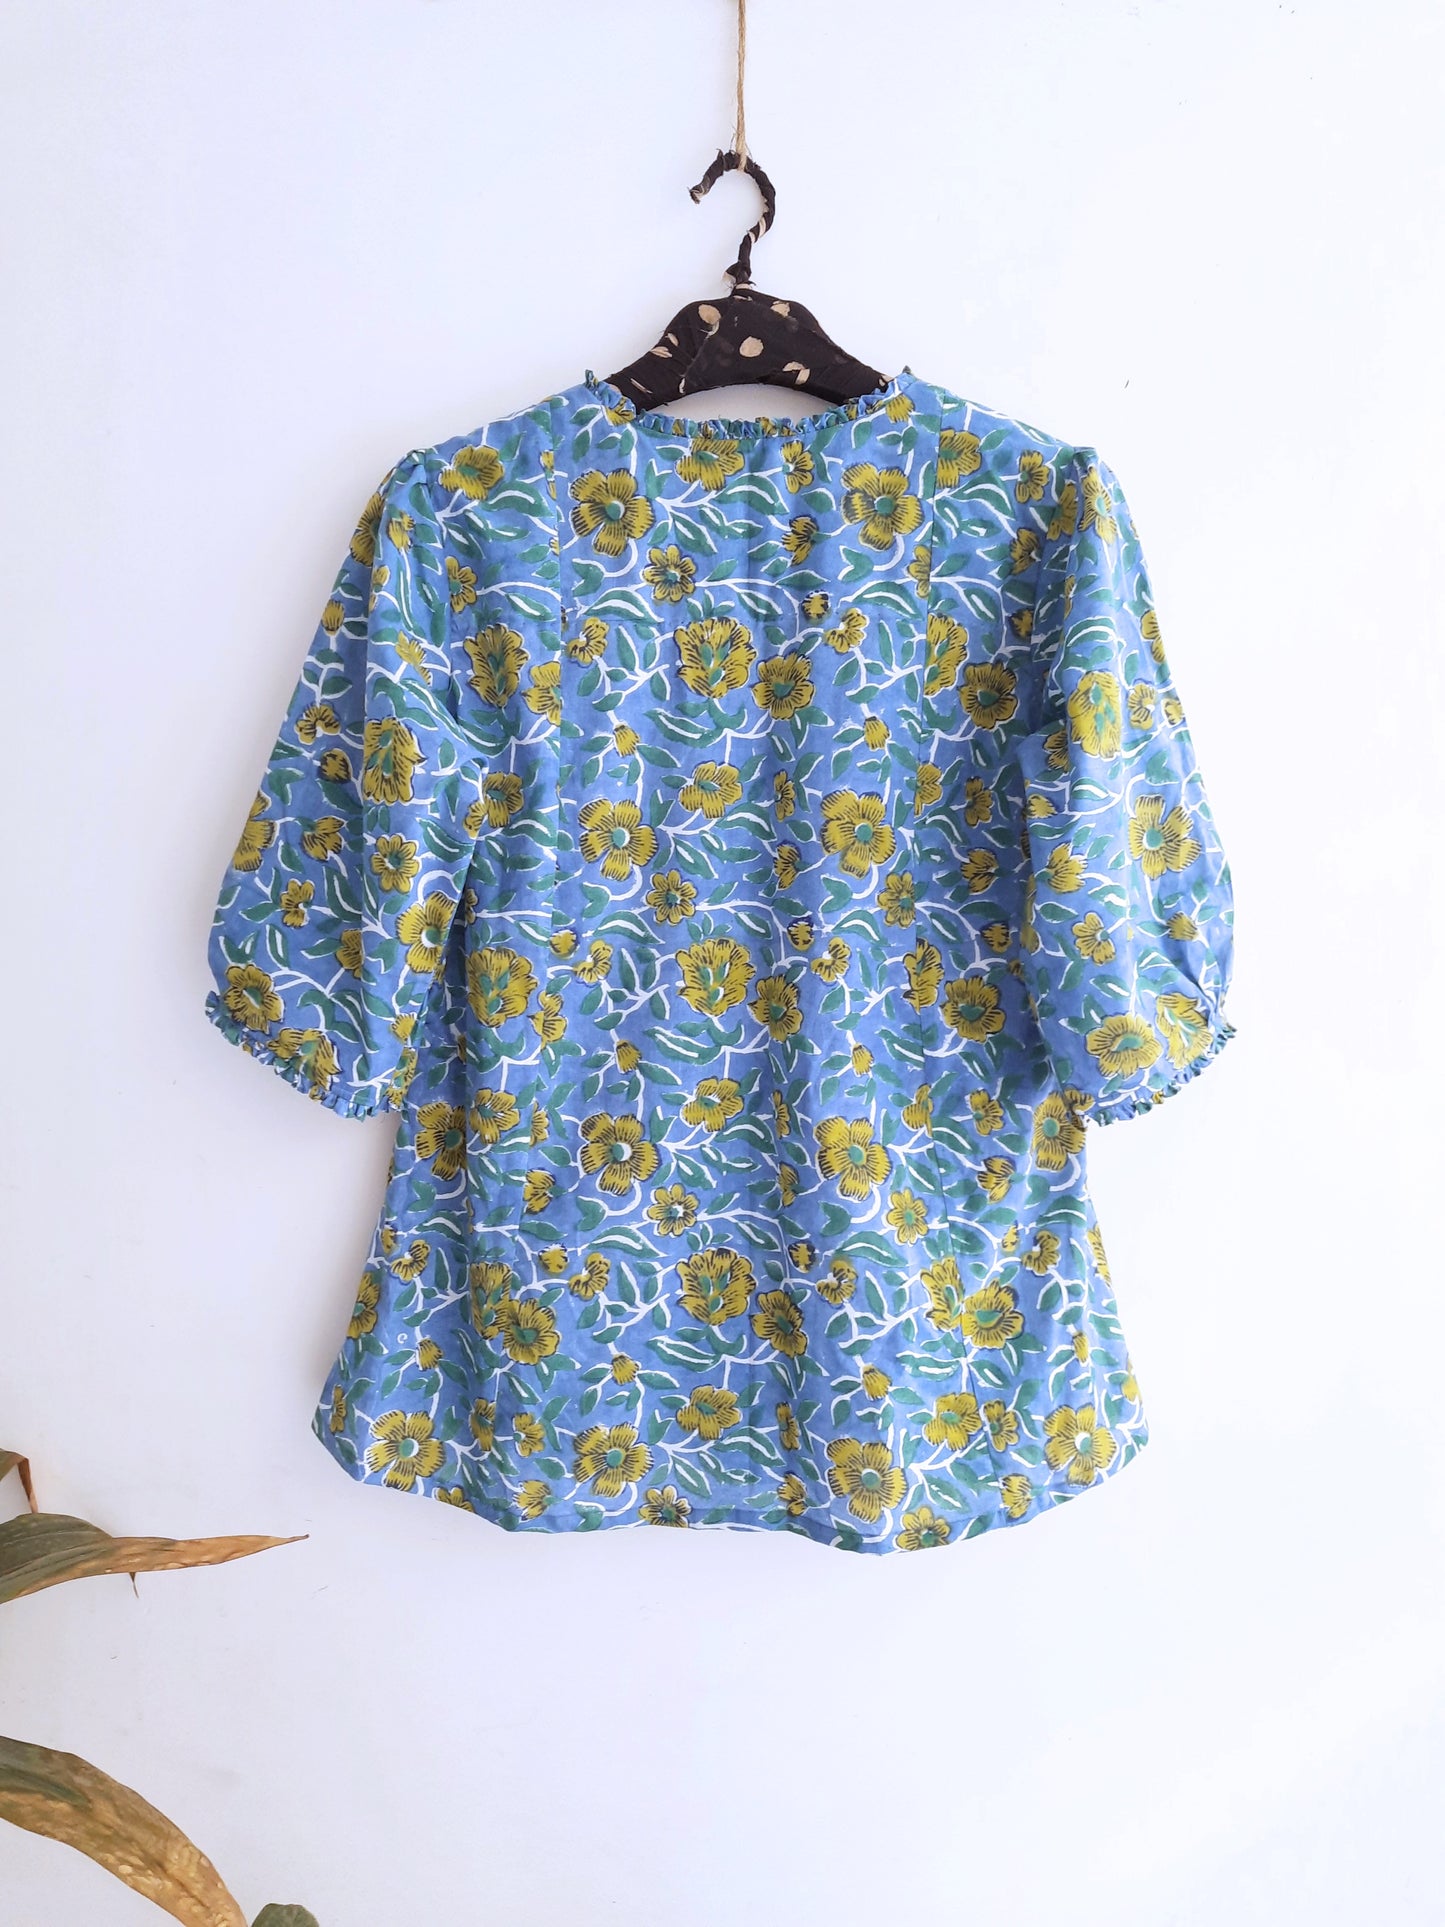 Summery blue floral top for women